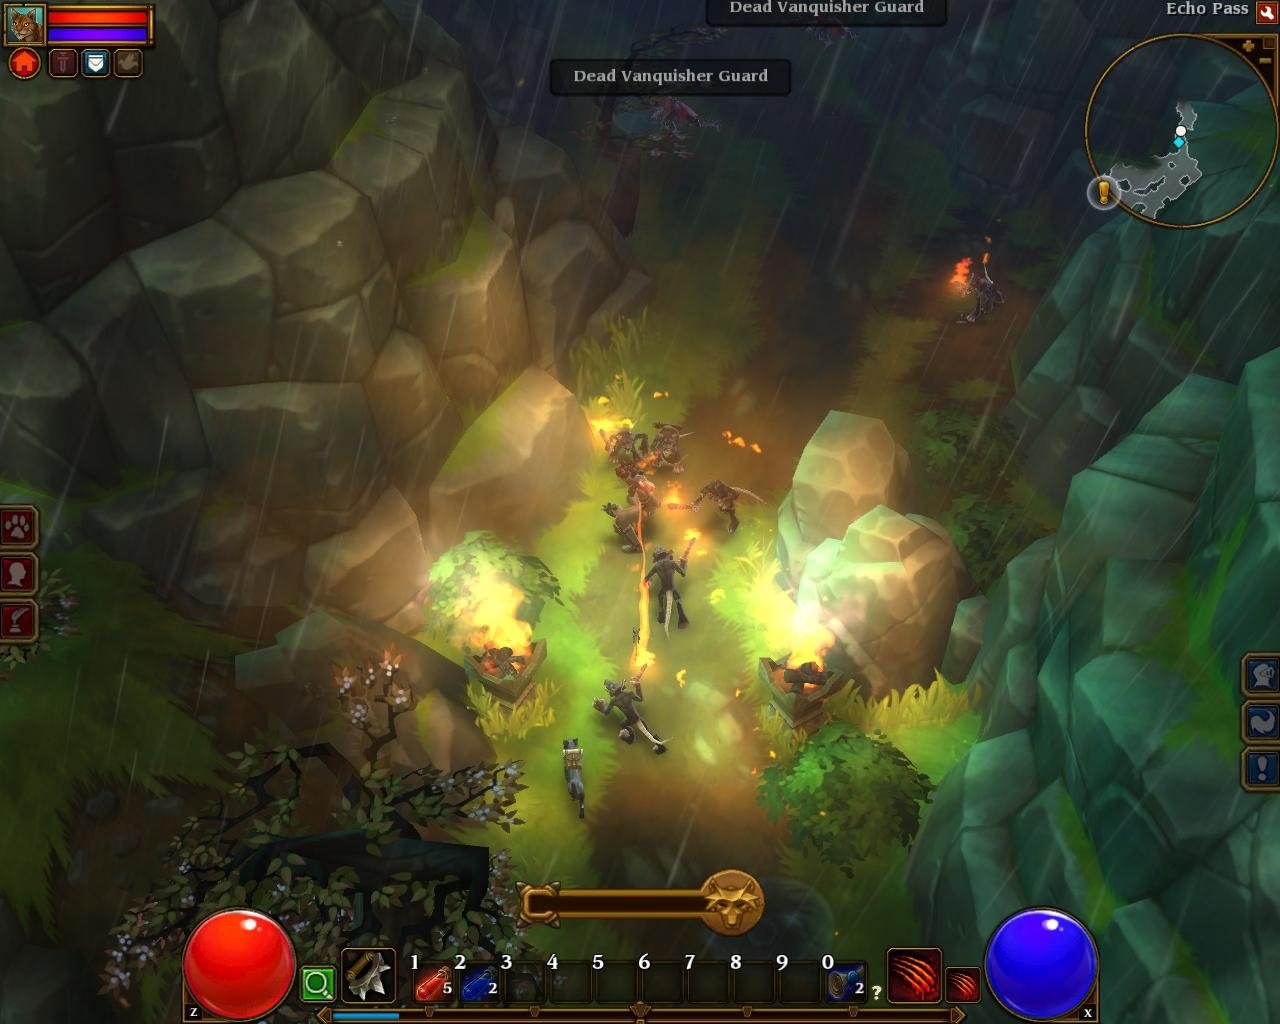 free download torchlight 2 switch